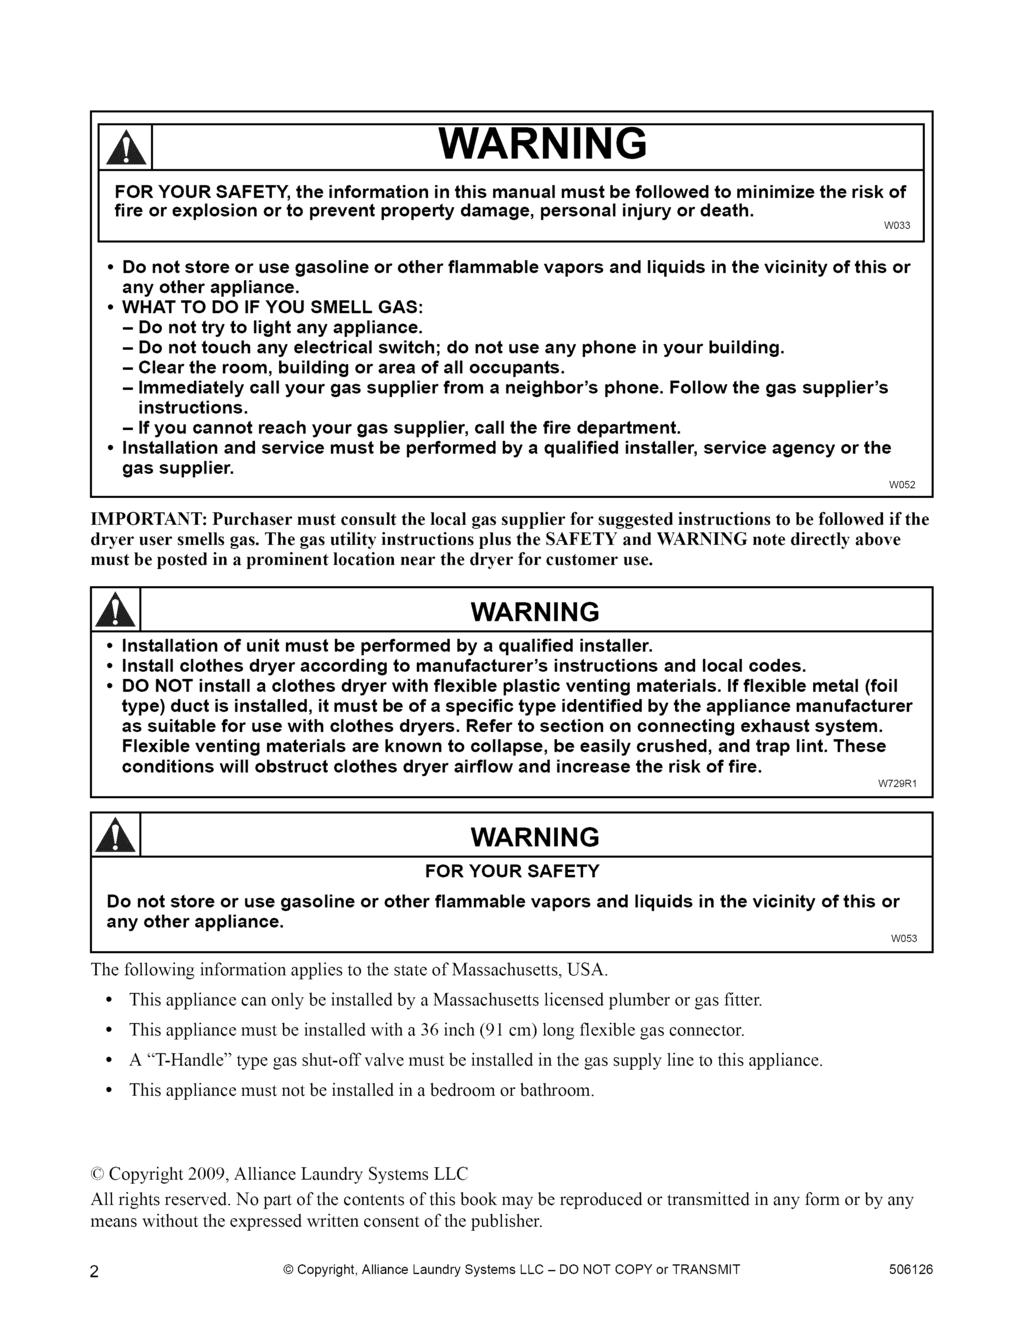 FOR YOUR SAFETY, the information in this manual must be followed to minimize the risk of fire or explosion or to prevent property damage, personal injury or death W0 Do not store or use gasoline or